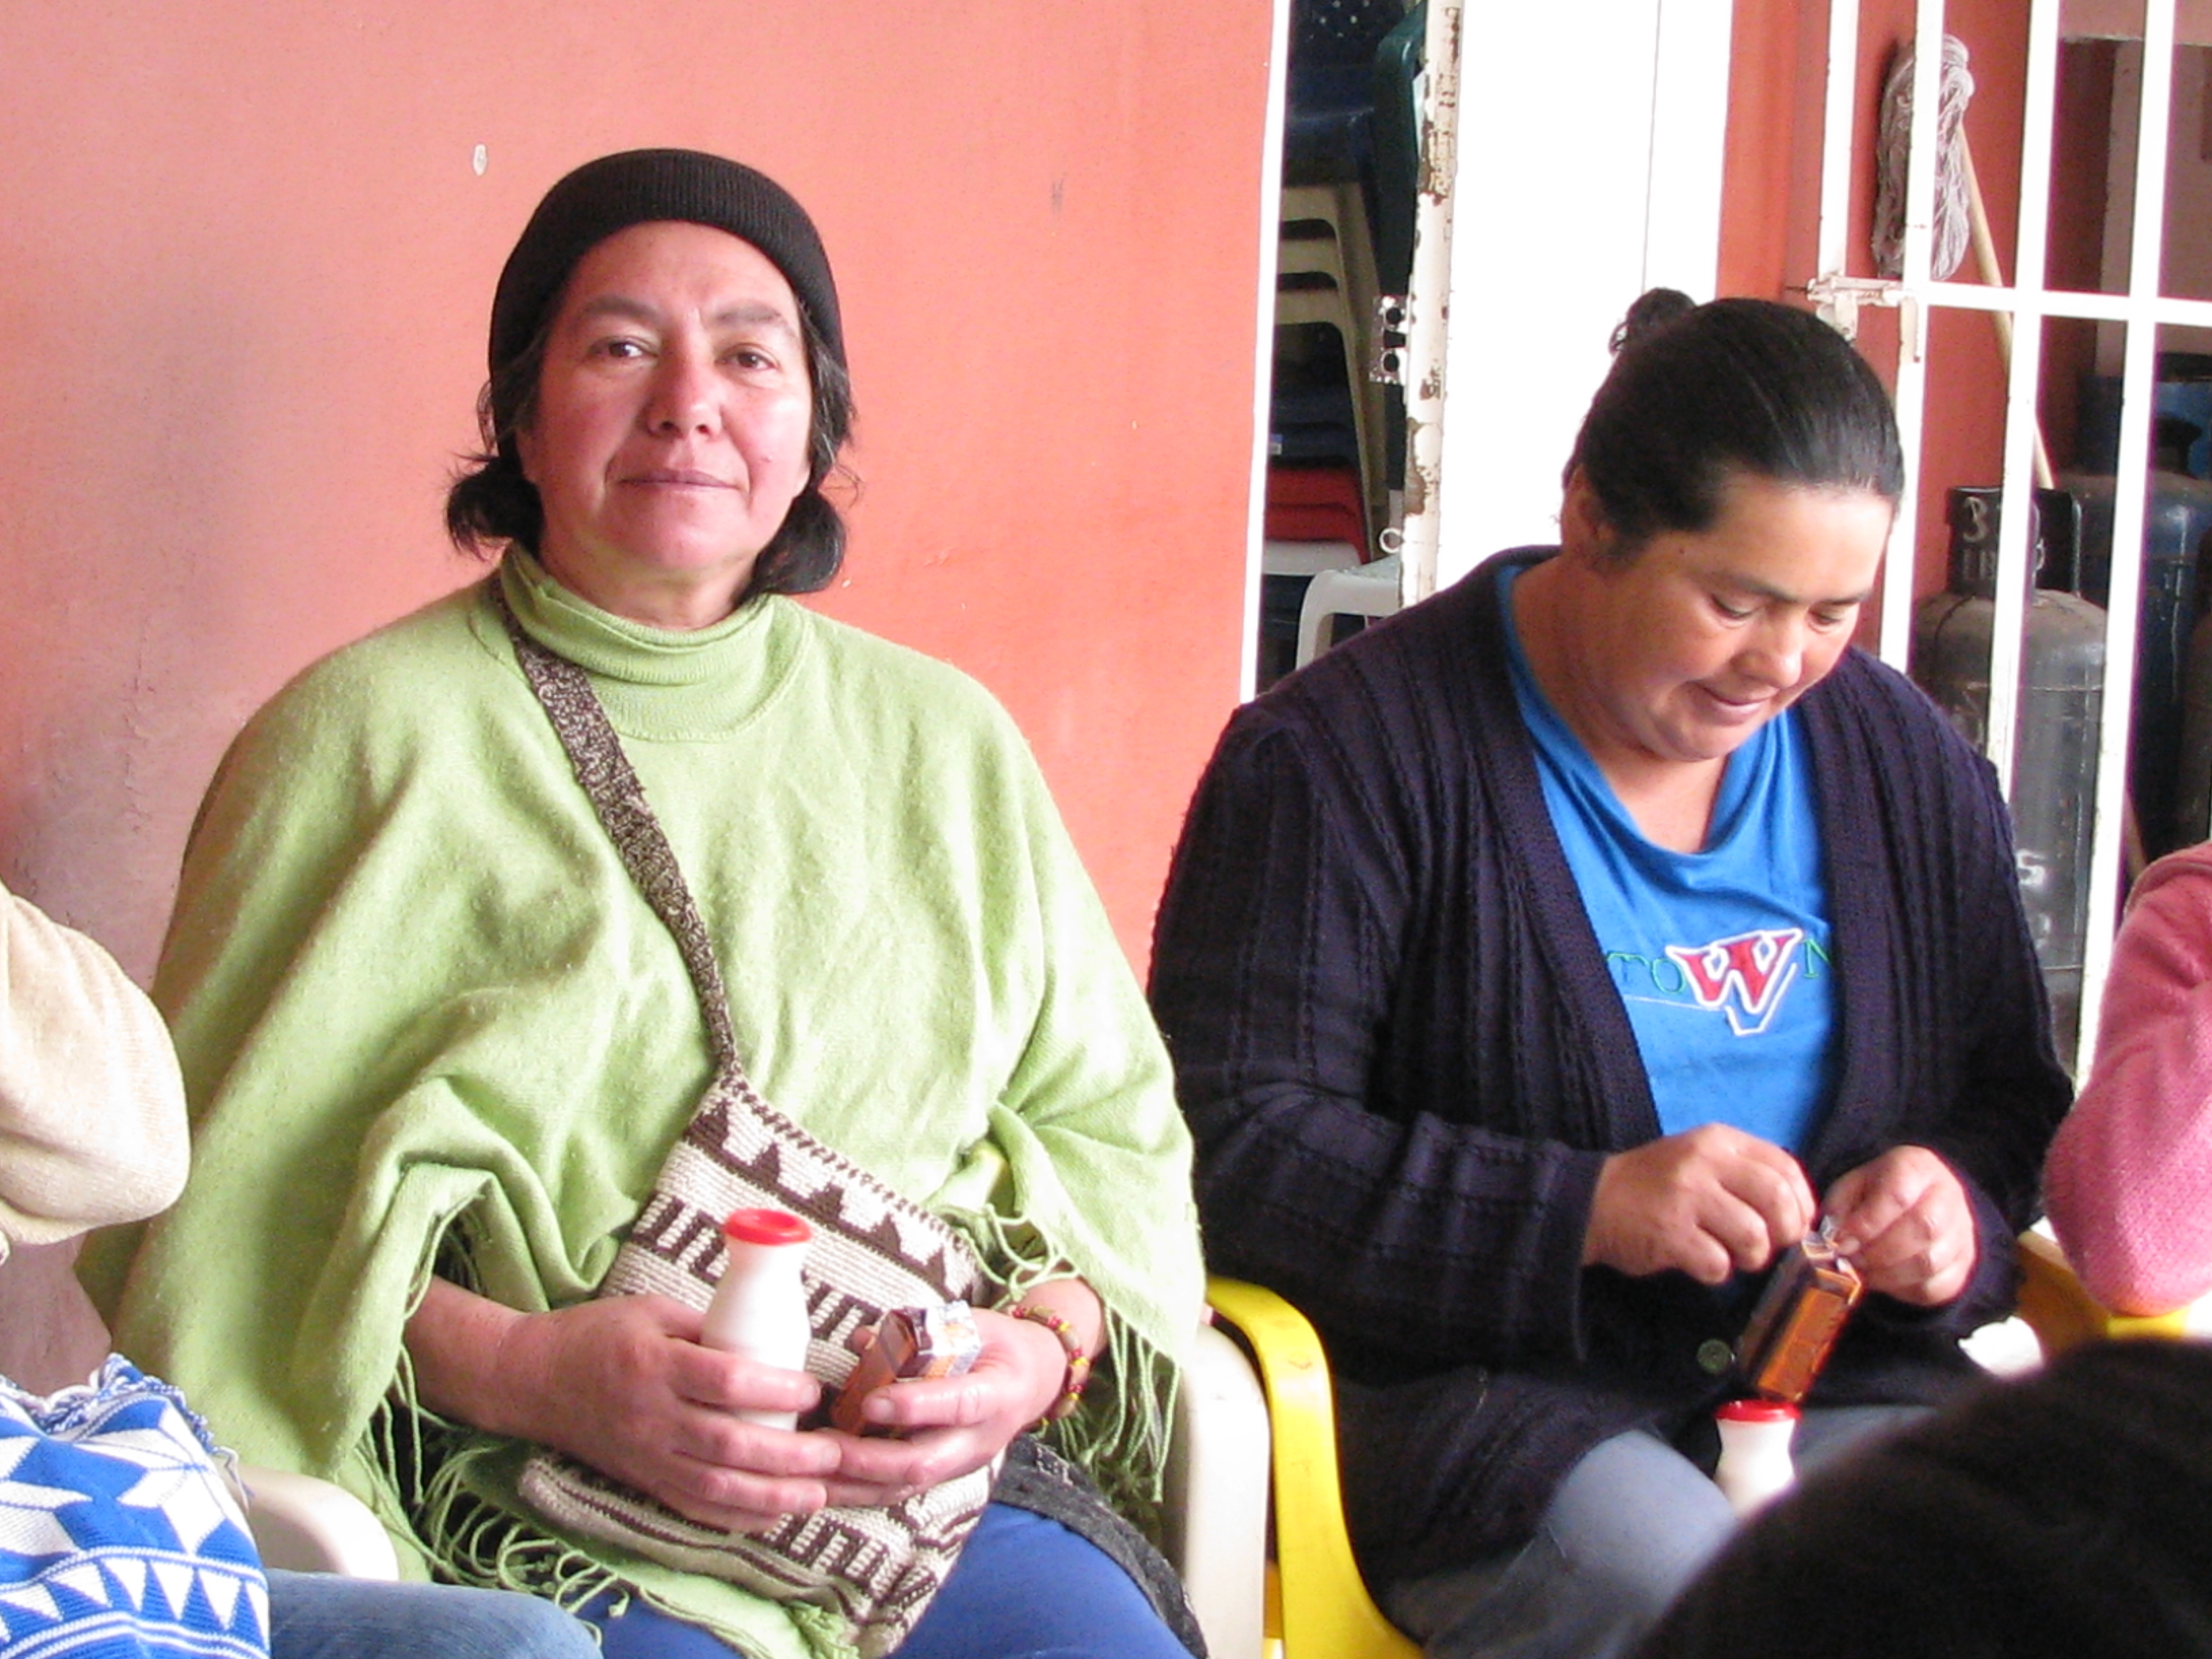 The “Seres de cuidado” strategy was characterized by community and institutional participation